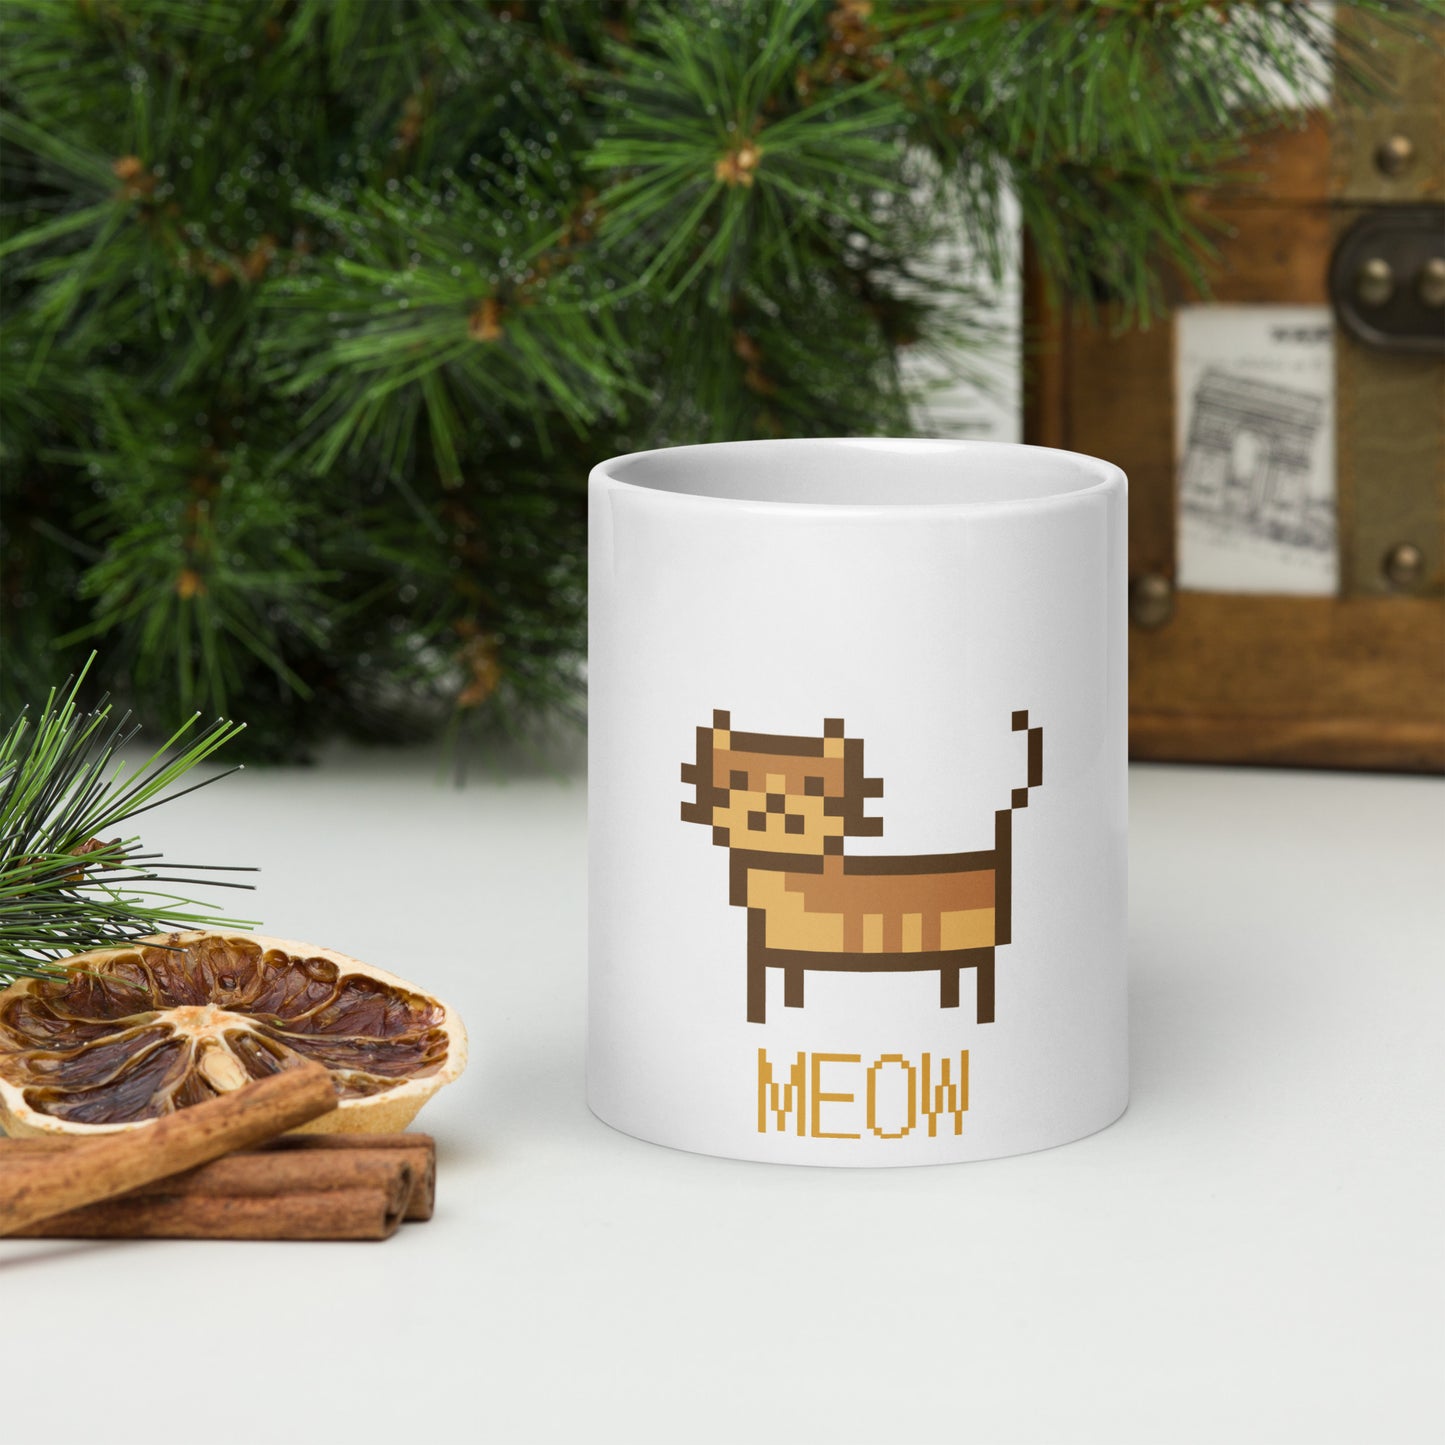 white mug with print of a cat and text "meow"